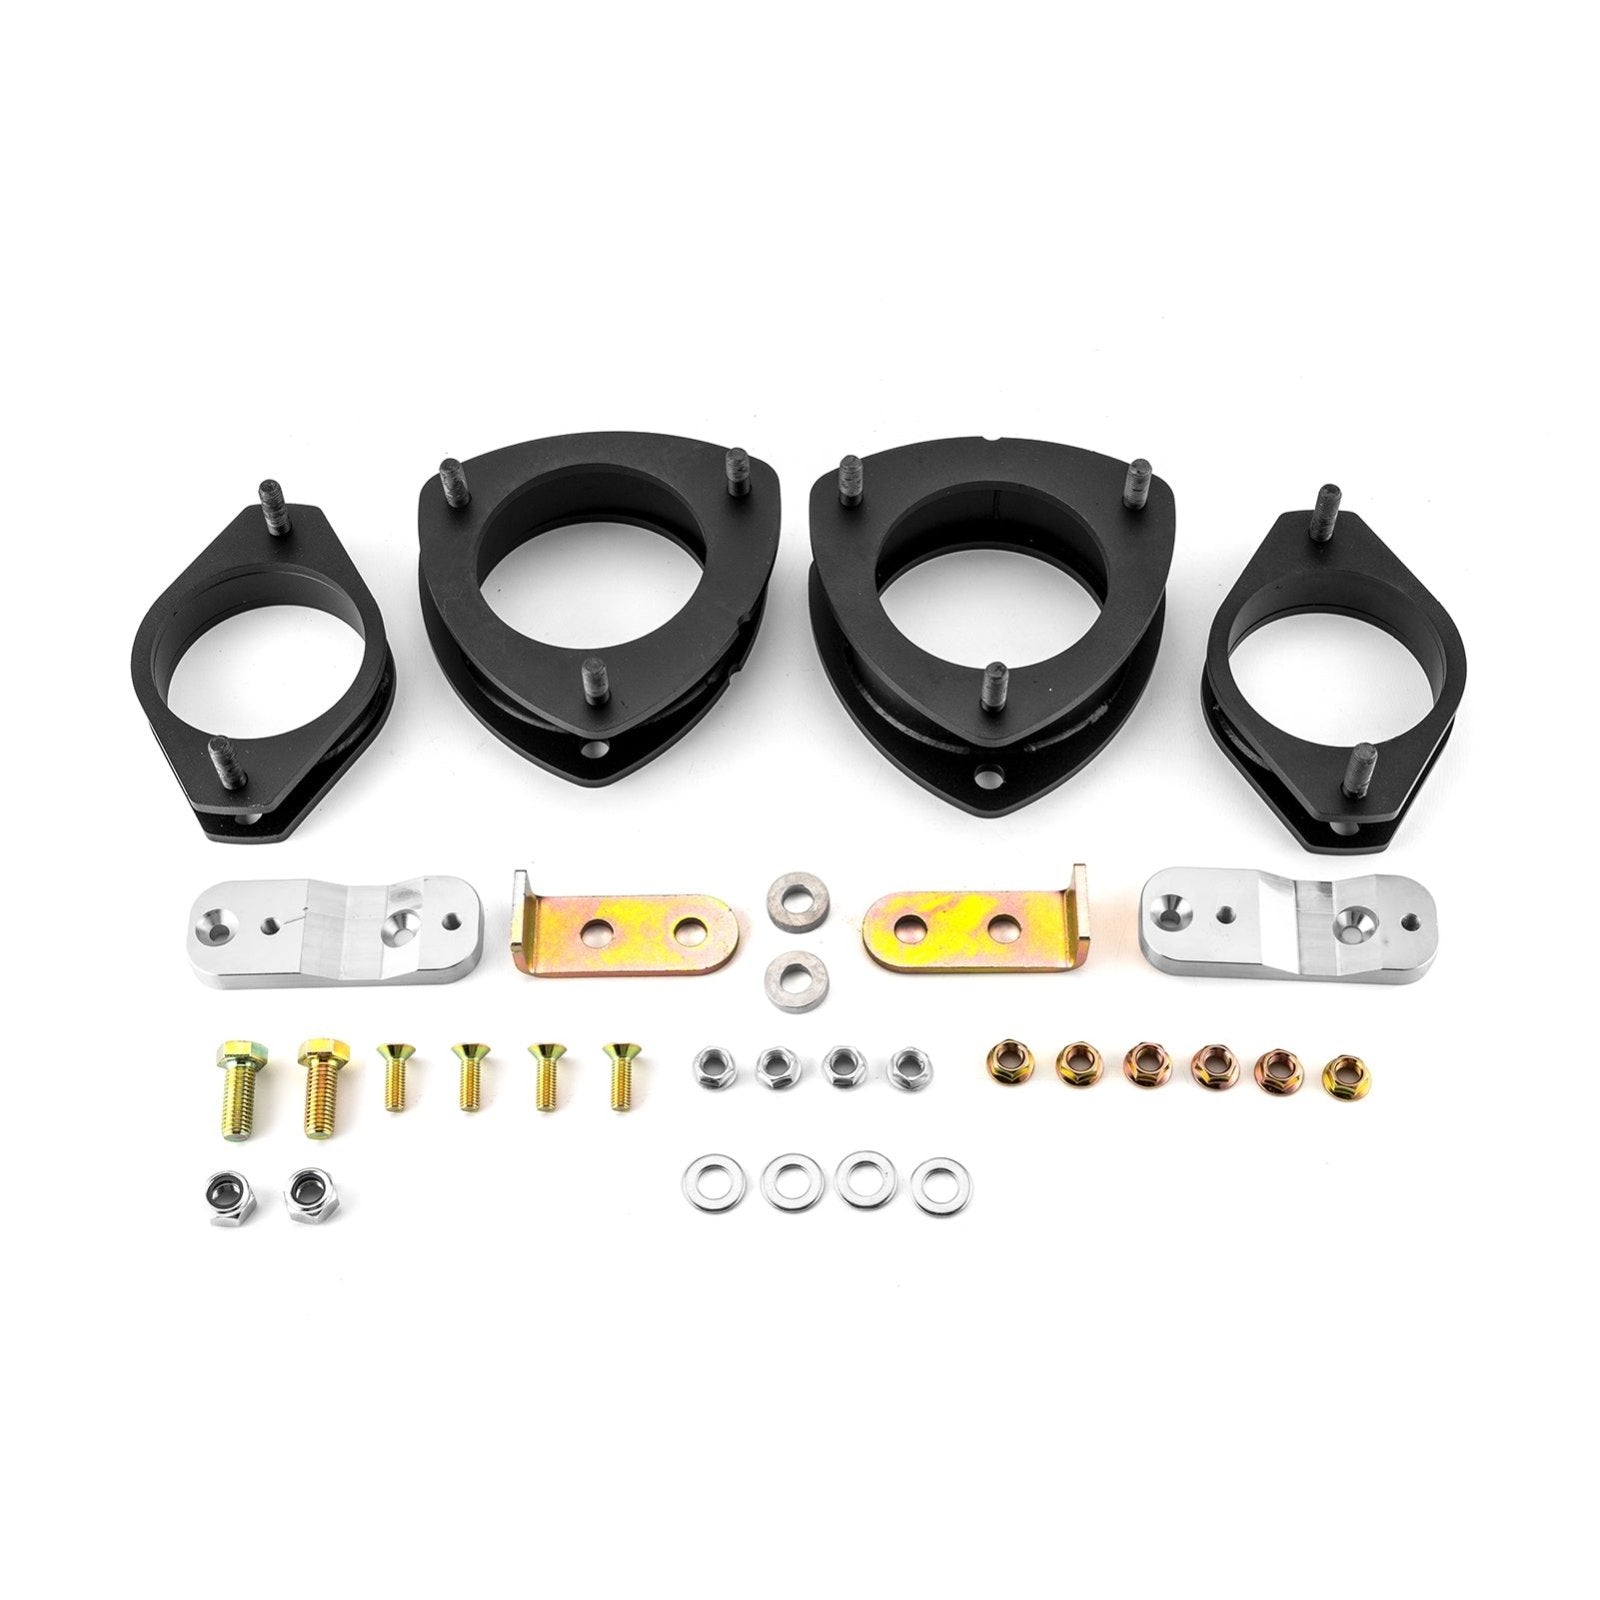 2015-2019 Subaru Outback Front 2” & Rear 1.5” Full Leveling Suspension Lift Kit - Weisen